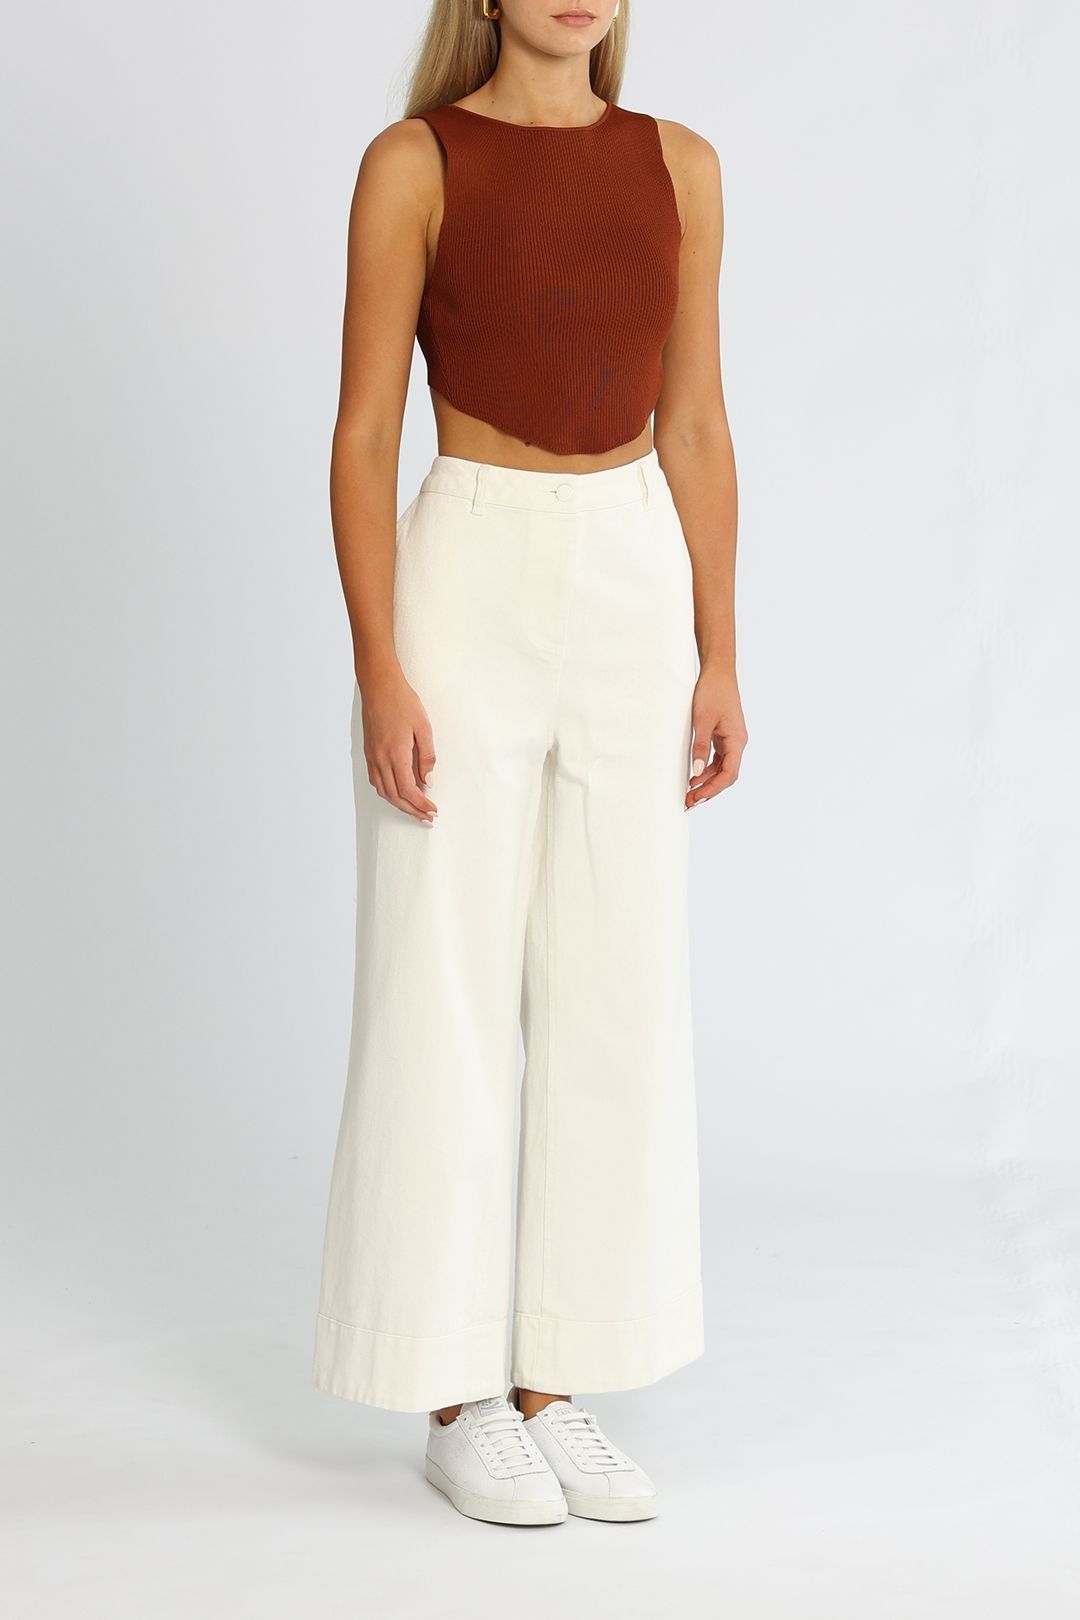 C&M Camilla And Marc La Salle Tailored Pant Cropped